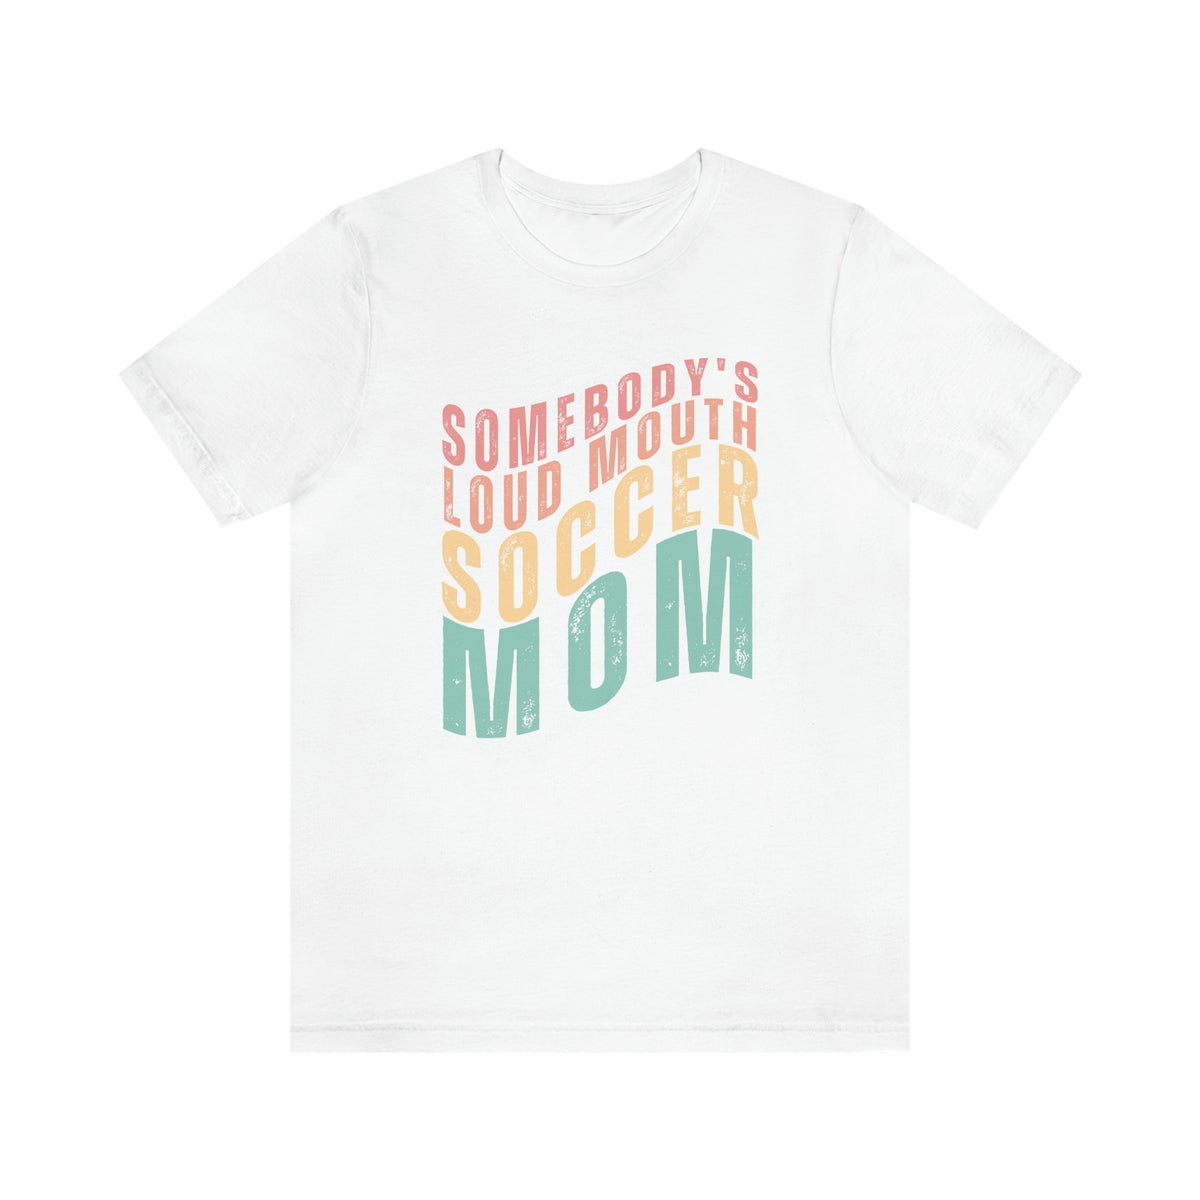 Somebody's Loud Mouth Soccer Mom Adult T-Shirt